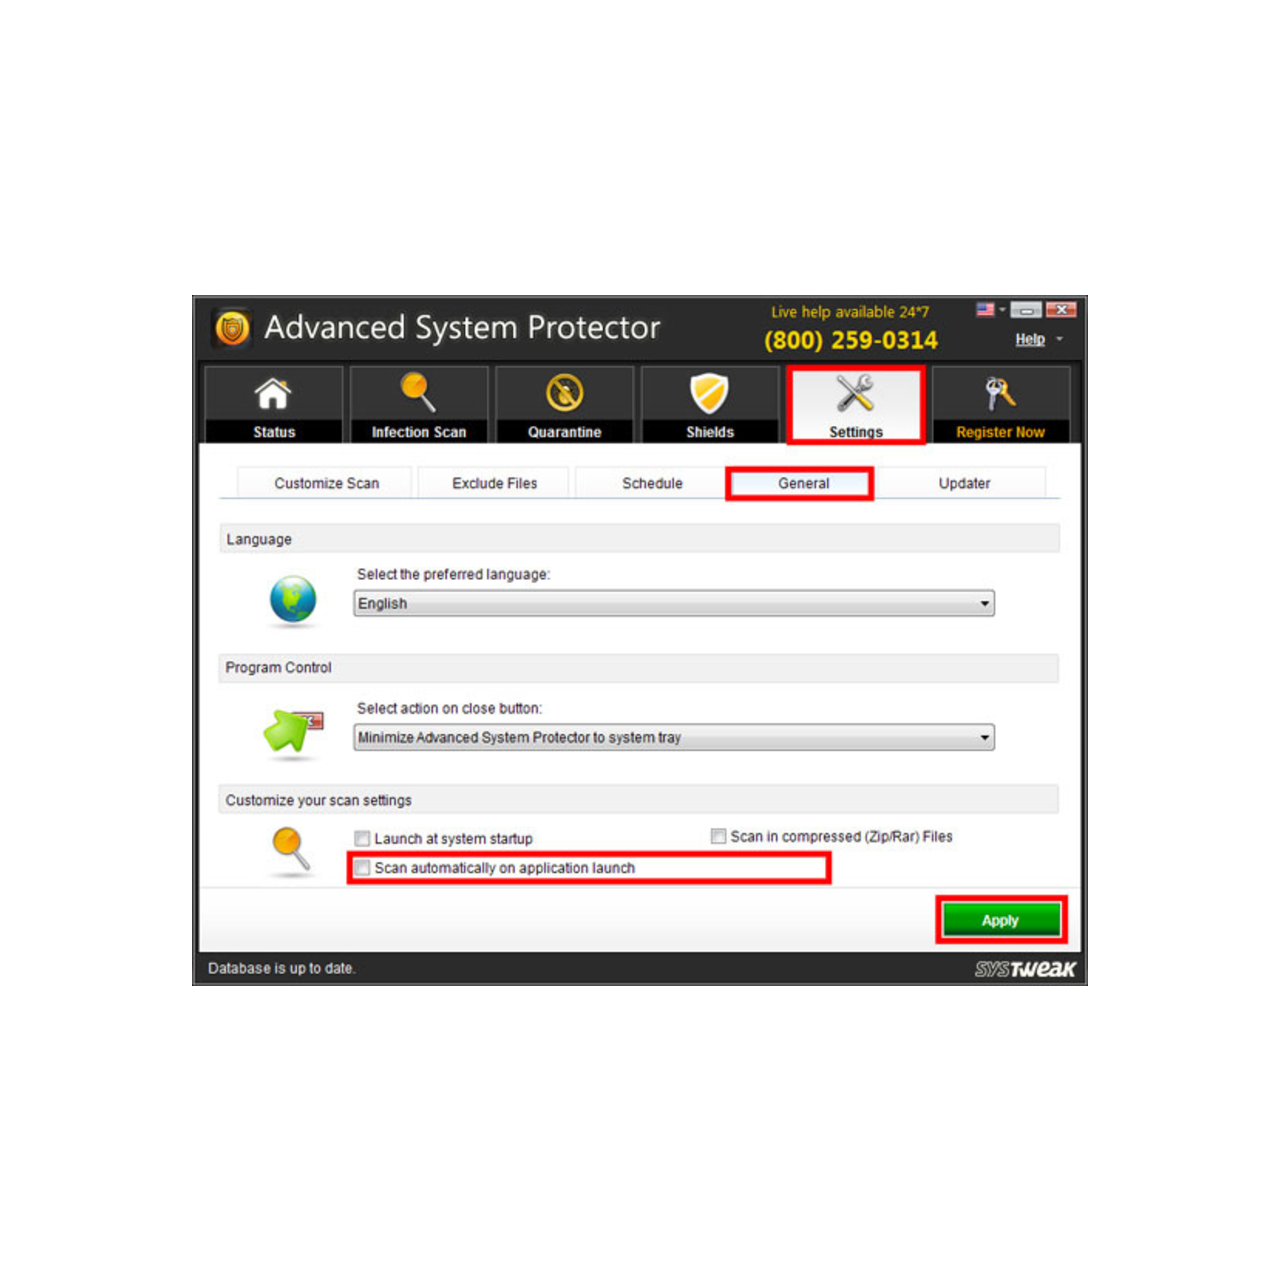 Advanced System Optimizer 3.81.8181.238 instal the new for windows